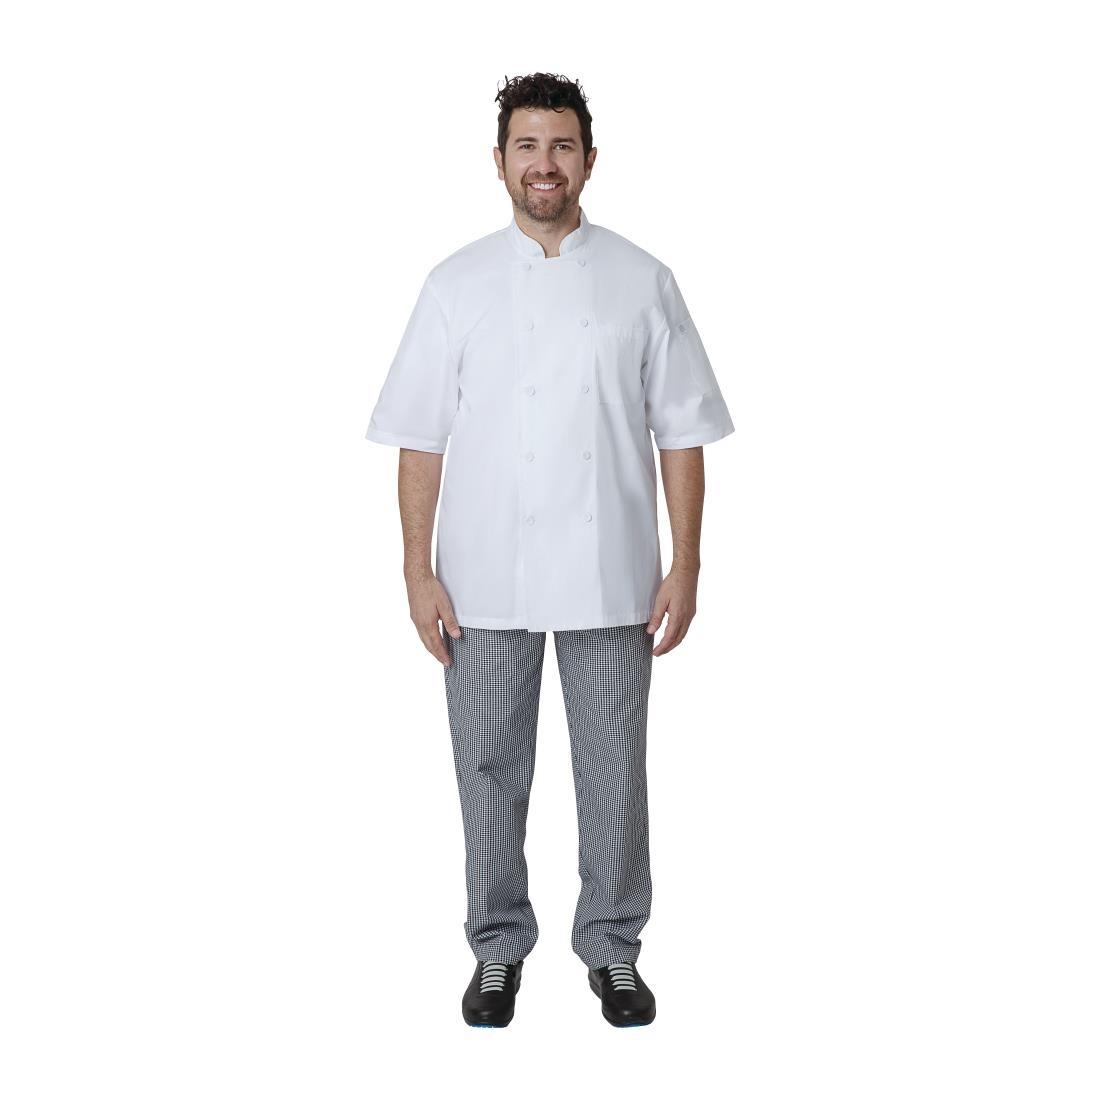 Chefs Works Montreal Cool Vent Unisex Short Sleeve Chefs Jacket White 4XL - A914-4XL  - 7